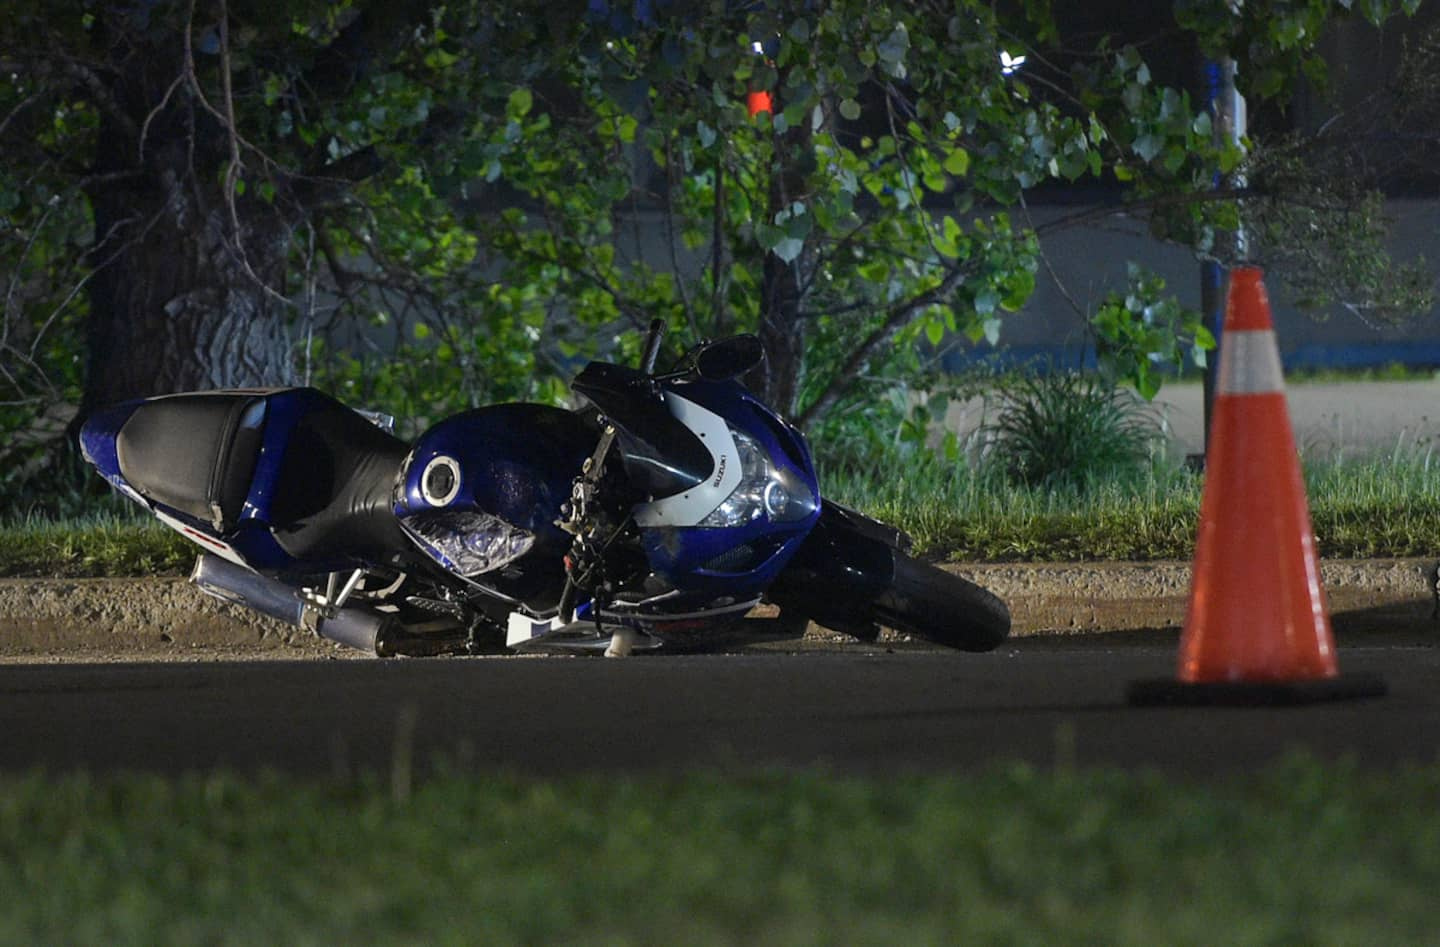 Saint-Laurent: a motorcyclist loses his life after going off the road